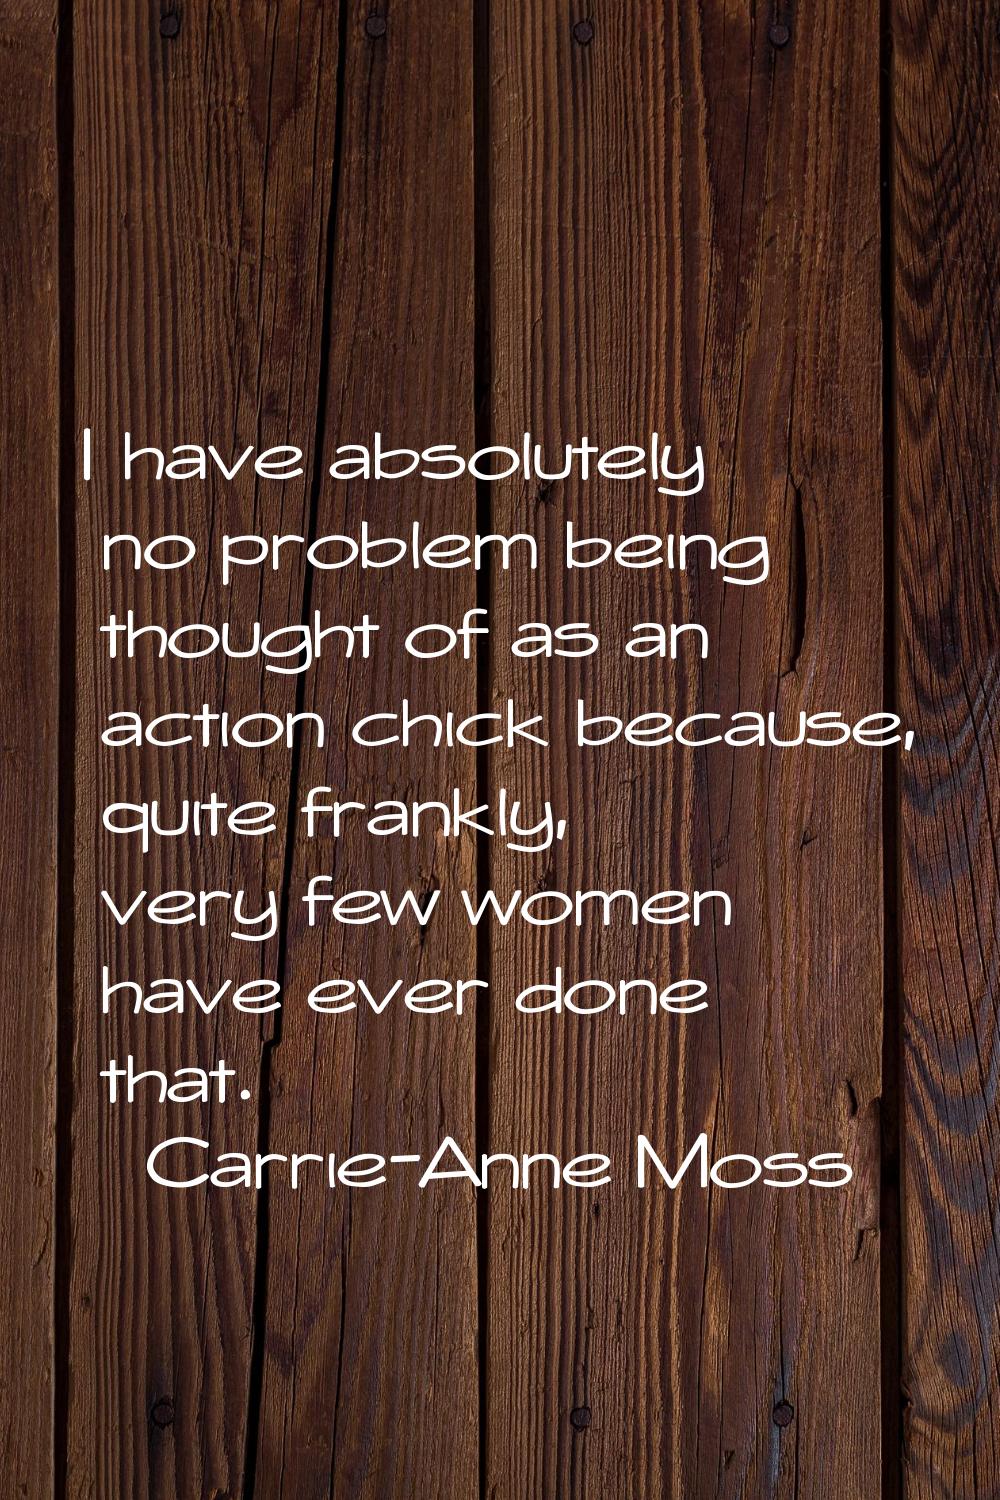 I have absolutely no problem being thought of as an action chick because, quite frankly, very few w